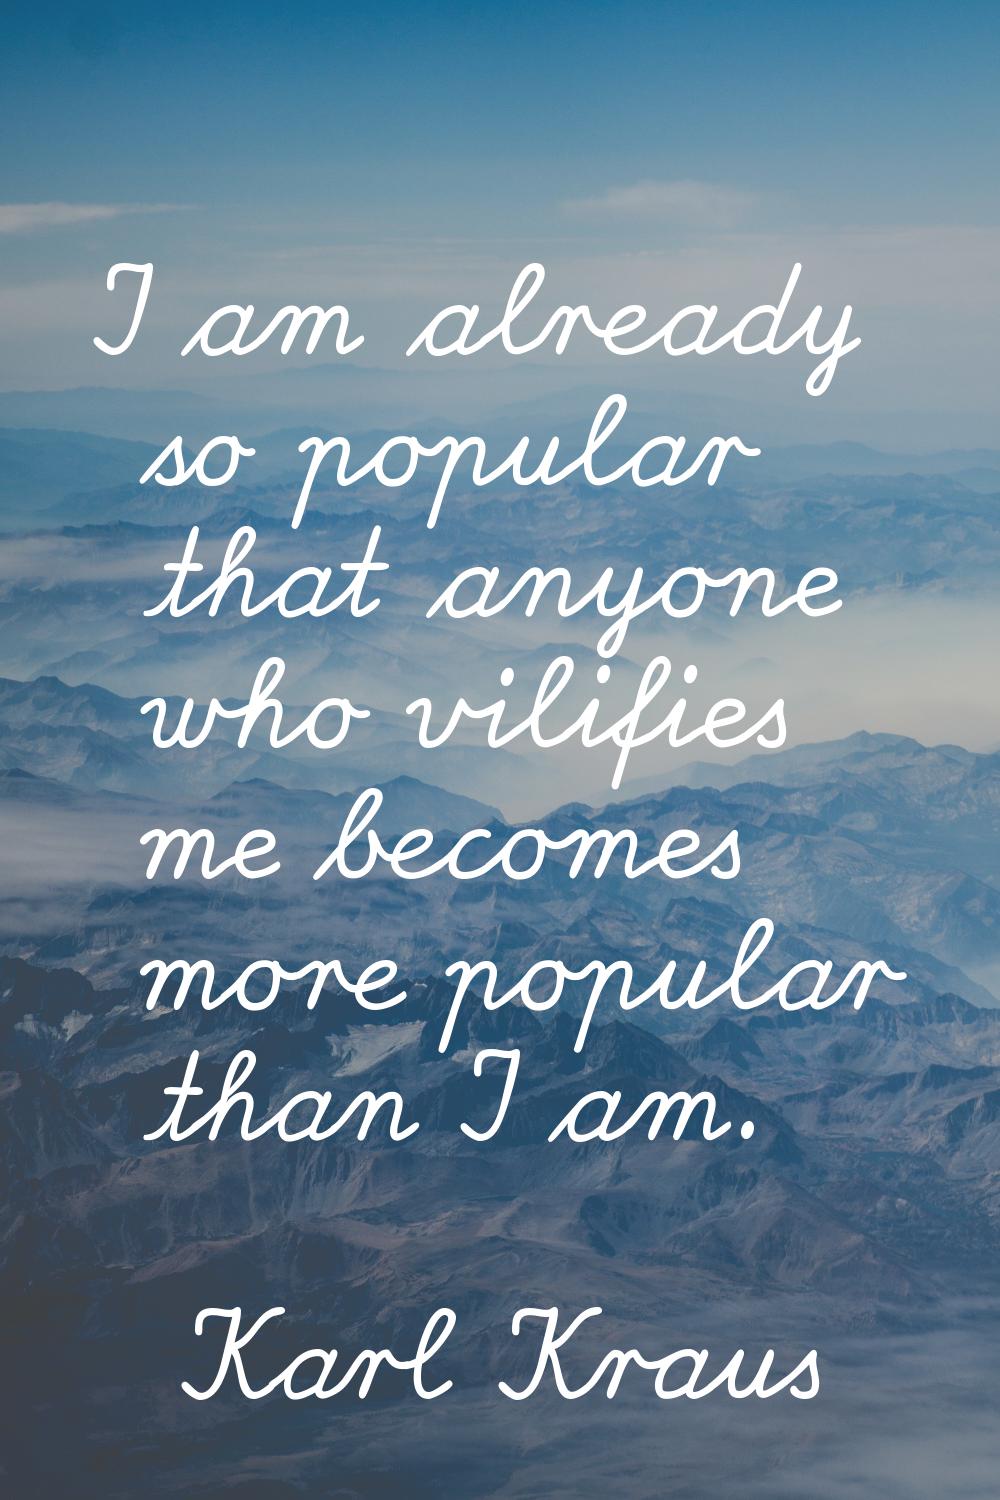 I am already so popular that anyone who vilifies me becomes more popular than I am.